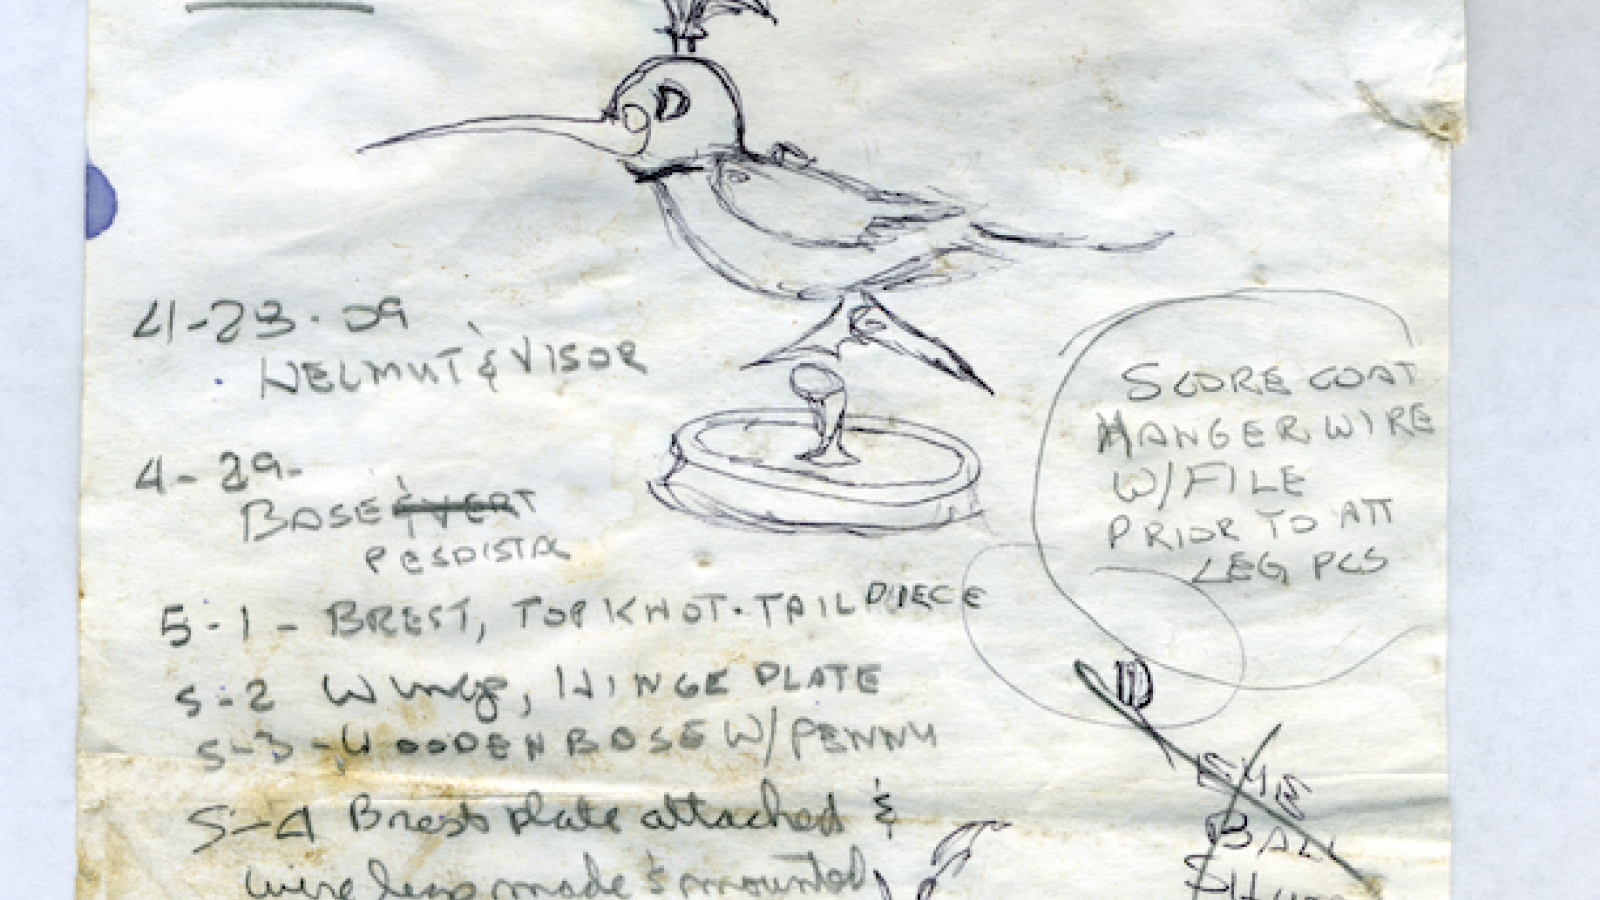 Sketch notes for Armored Hummingbird